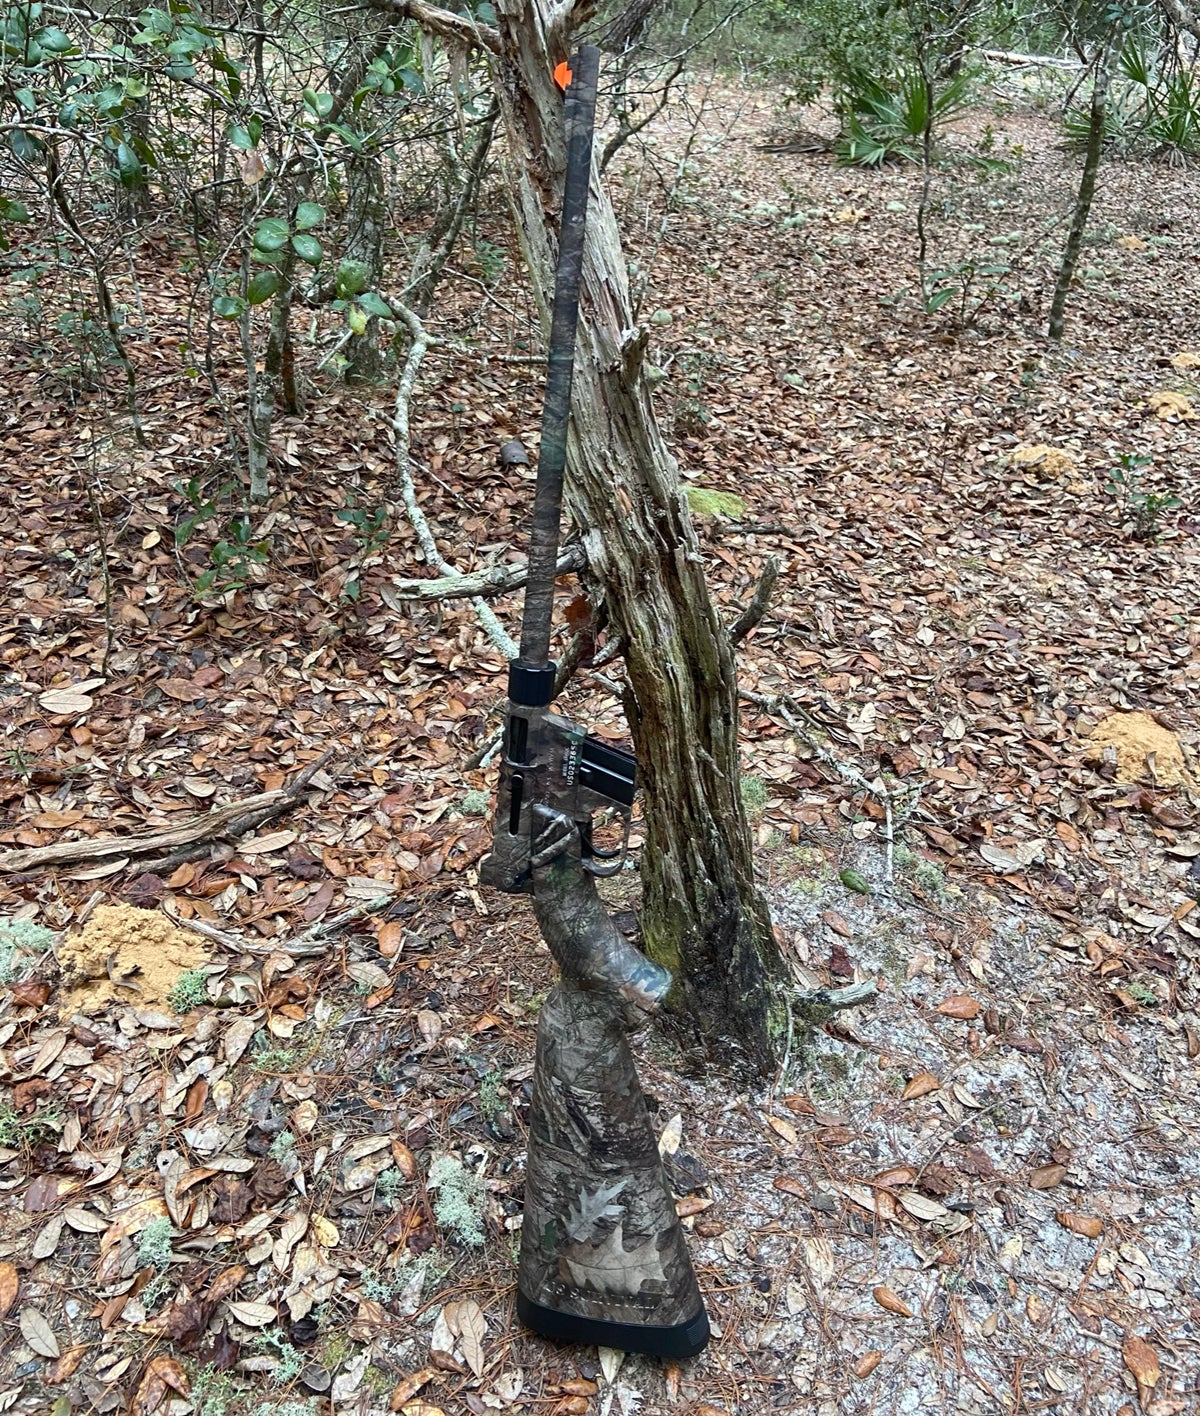 The Henry AR-7 Survival Rifle makes a good woods companion. (Photo © Russ Chastain)